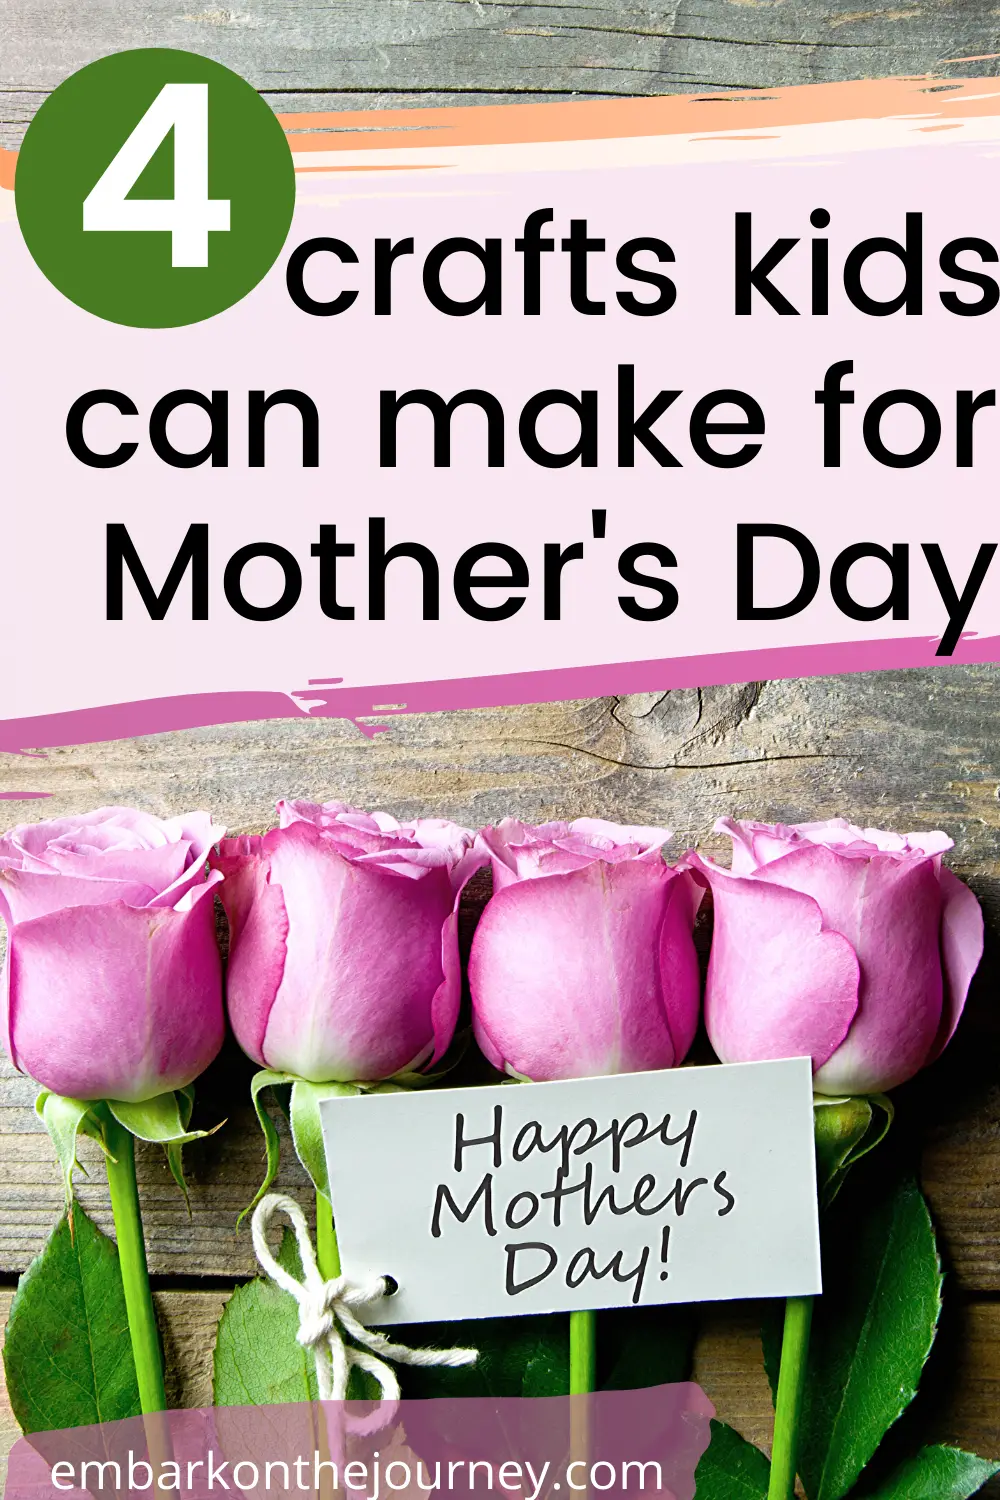 On Mother's Day, kids want to show mom just how special she is. Here are some frugal options for Mother's Day craft ideas kids can make!